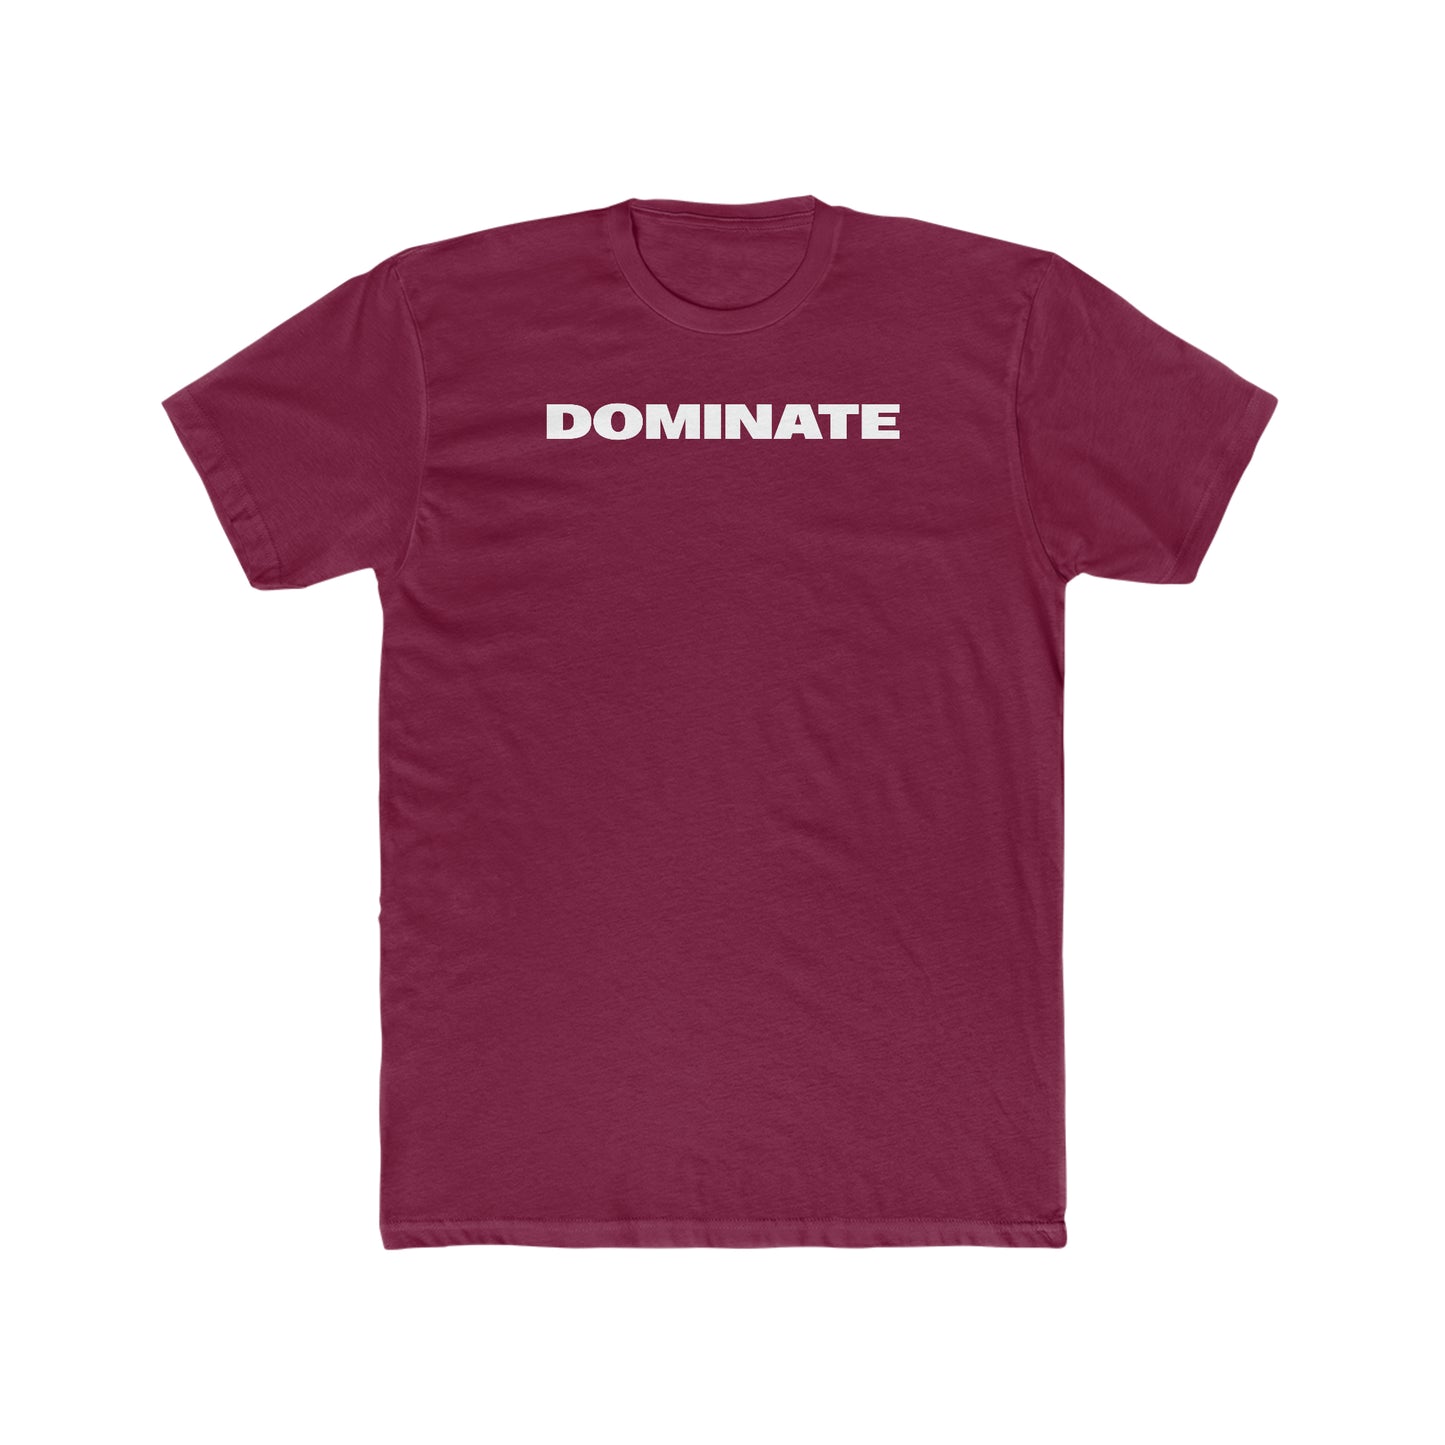 Dominate Tee - Never Stop Chasing